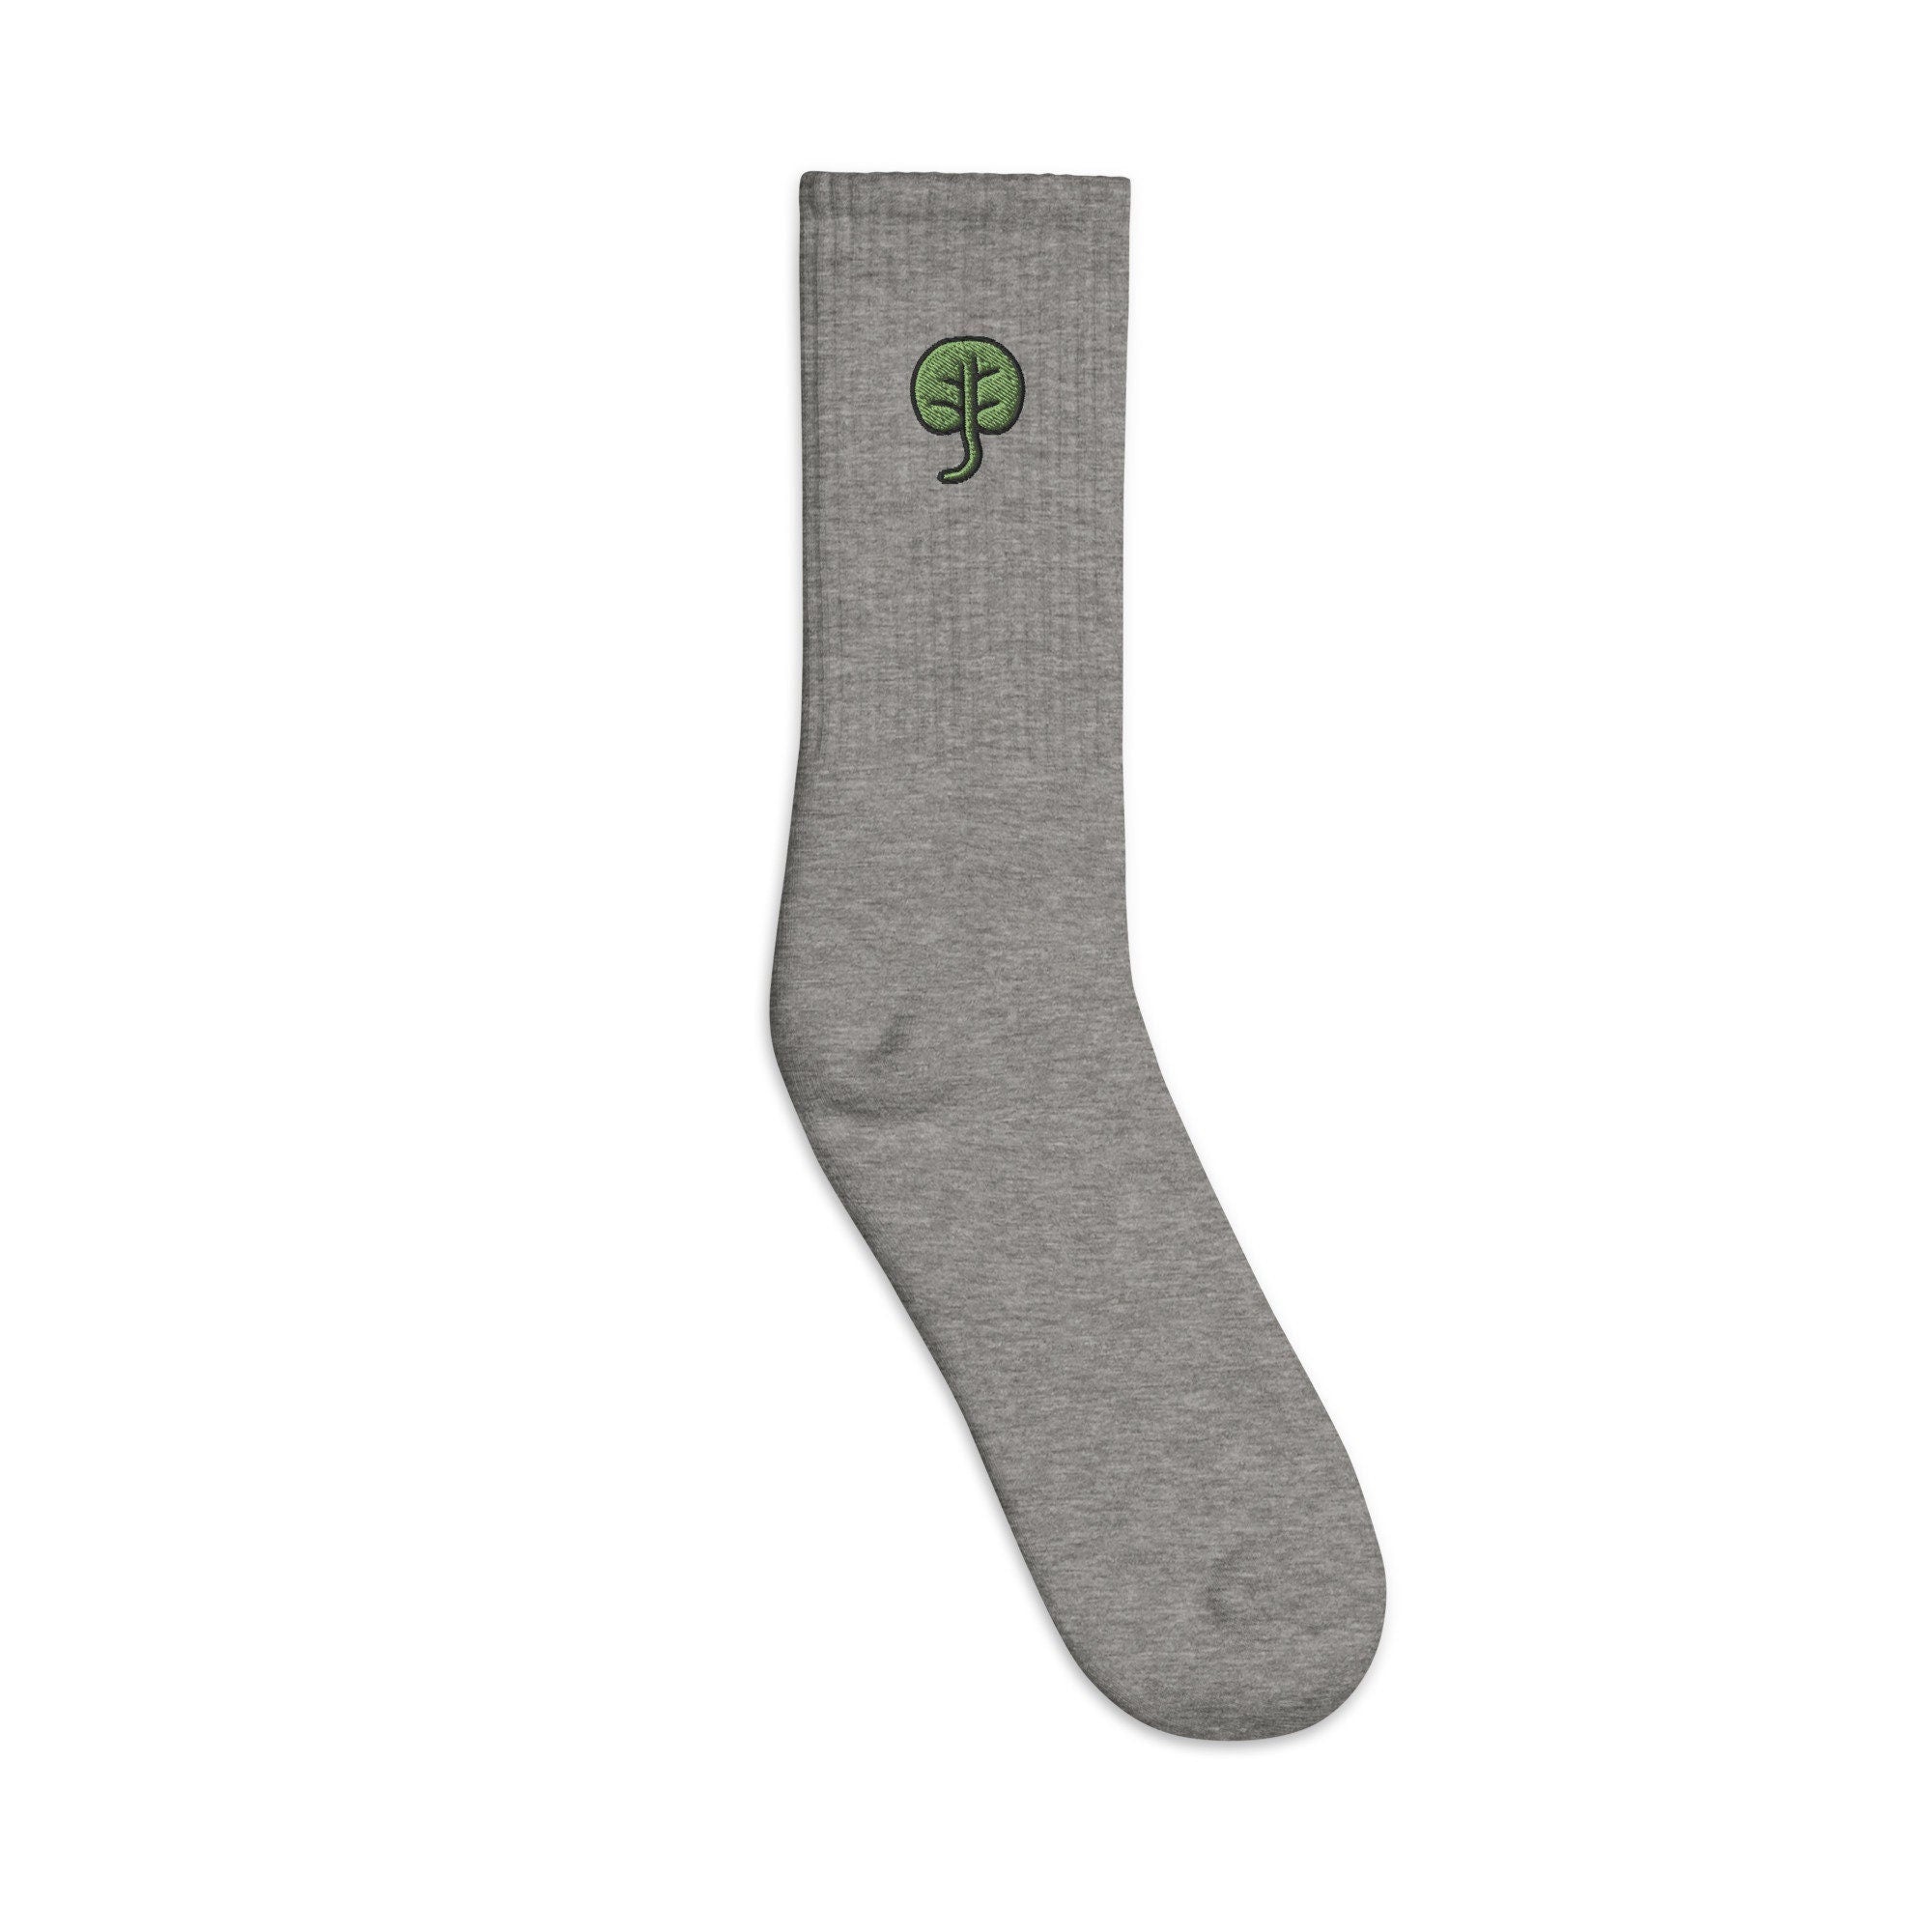 Spinach Embroidered Socks, Premium Embroidered Socks, Long Socks Gift - Multiple Colors